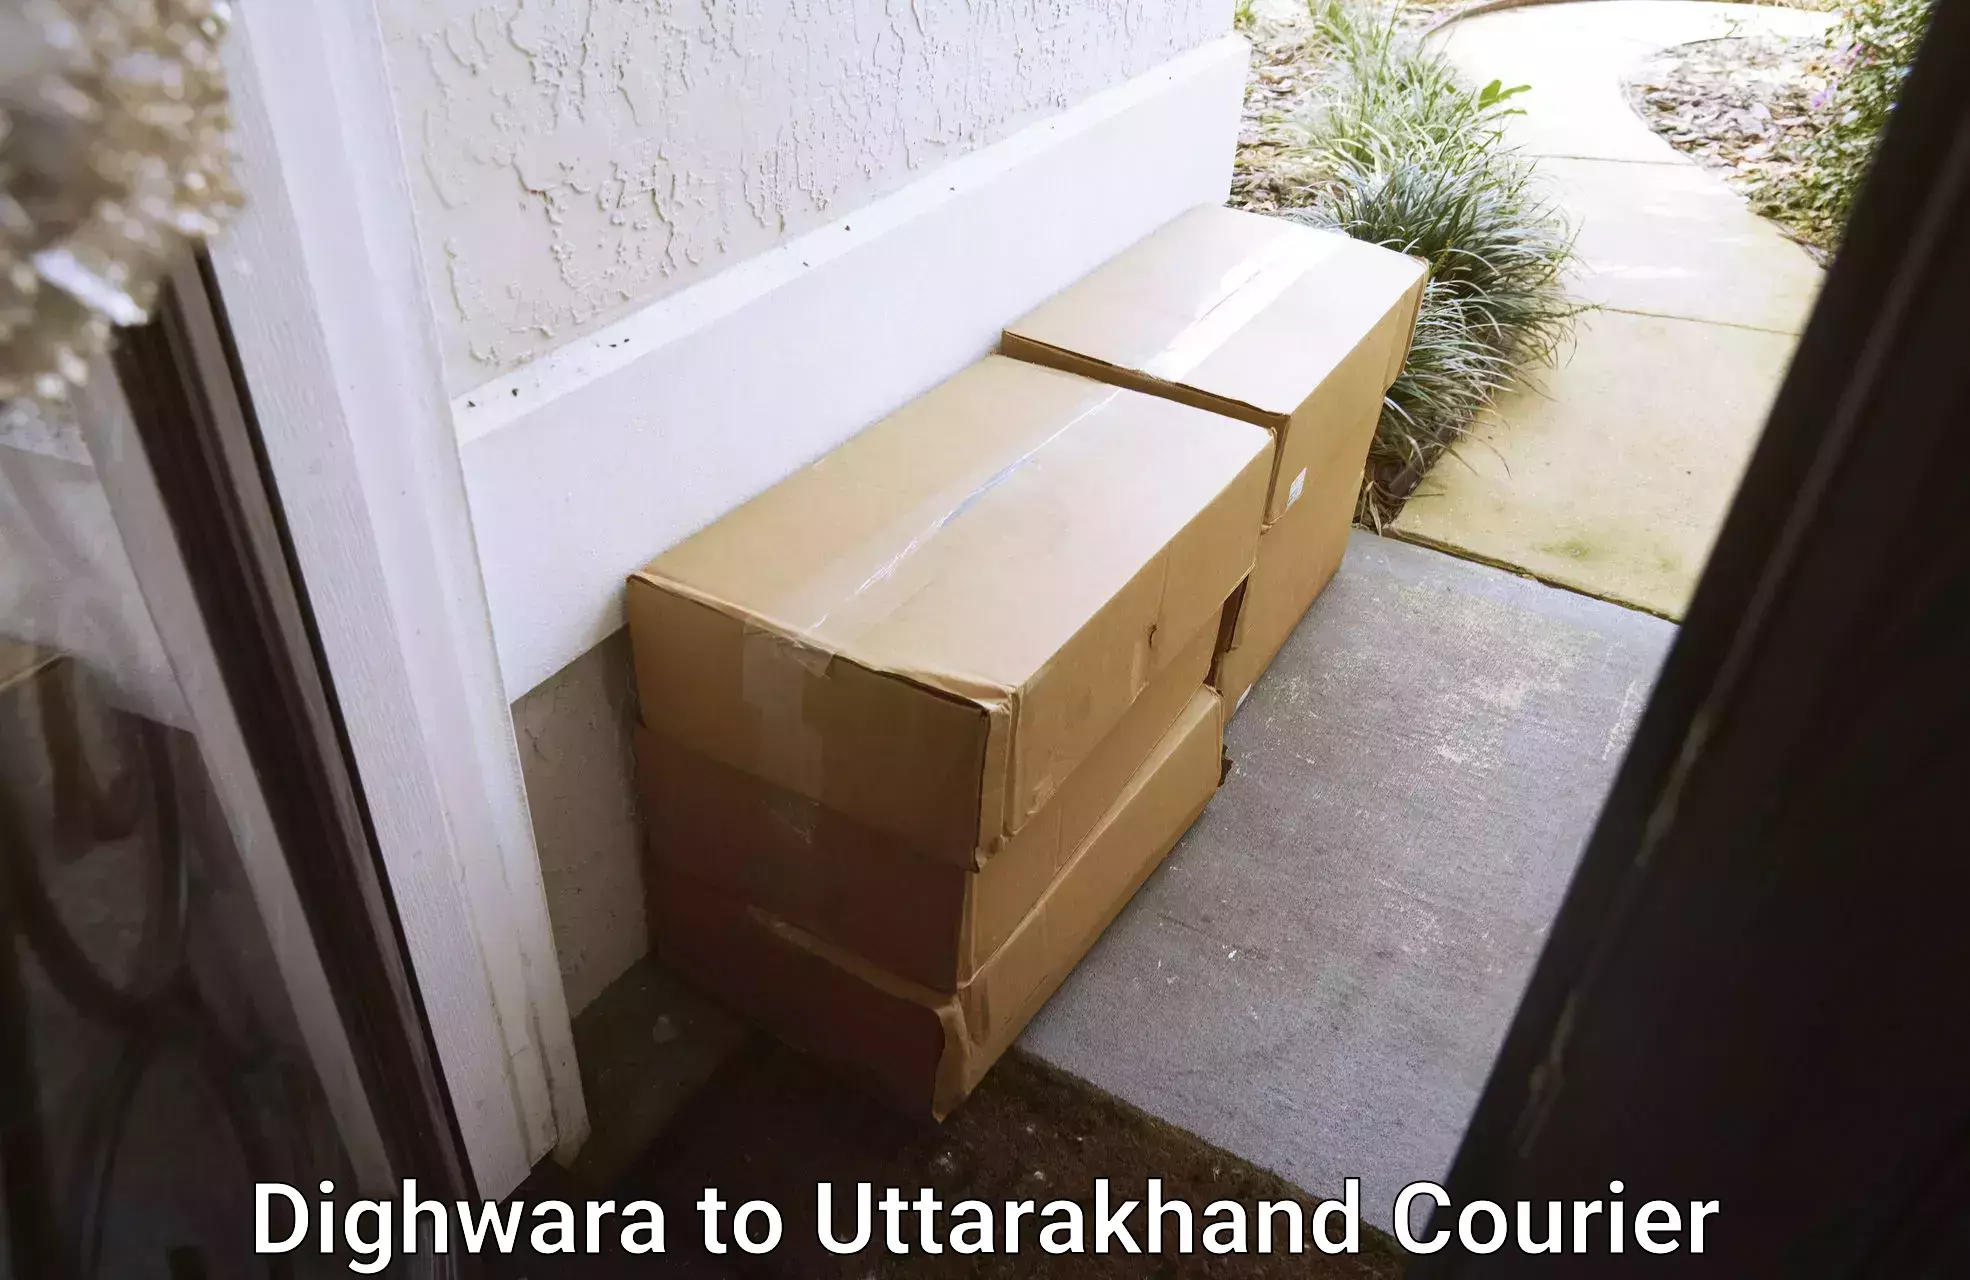 Professional packing services in Dighwara to Pauri Garhwal